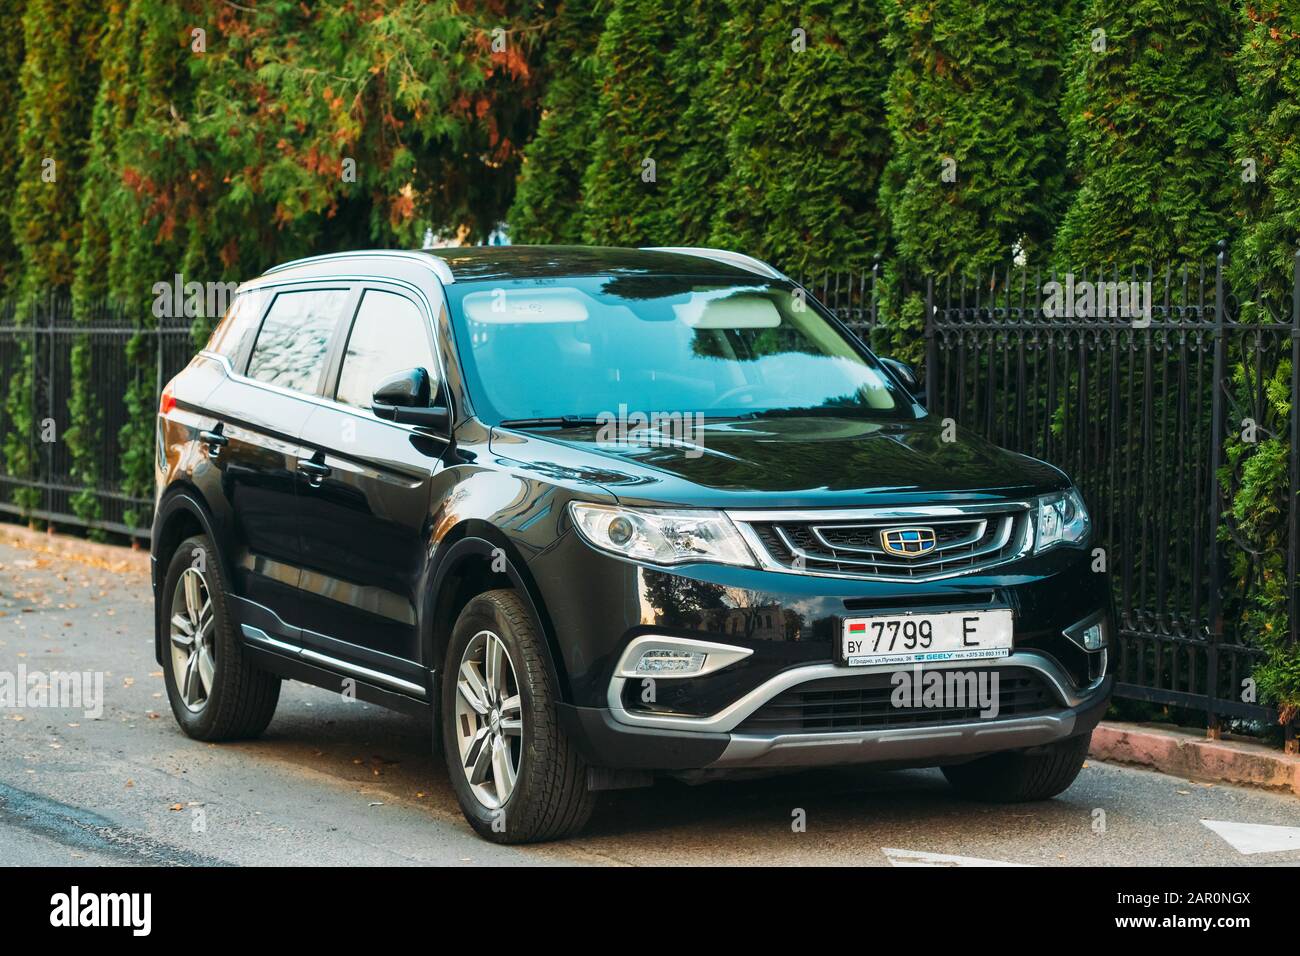 Grodno, Belarus - October 16, 2019: Black Geely Boyue (Geely Atlas) Car Parking At Street. The Geely Boyue Is A Compact Crossover Suv Produced By The Stock Photo